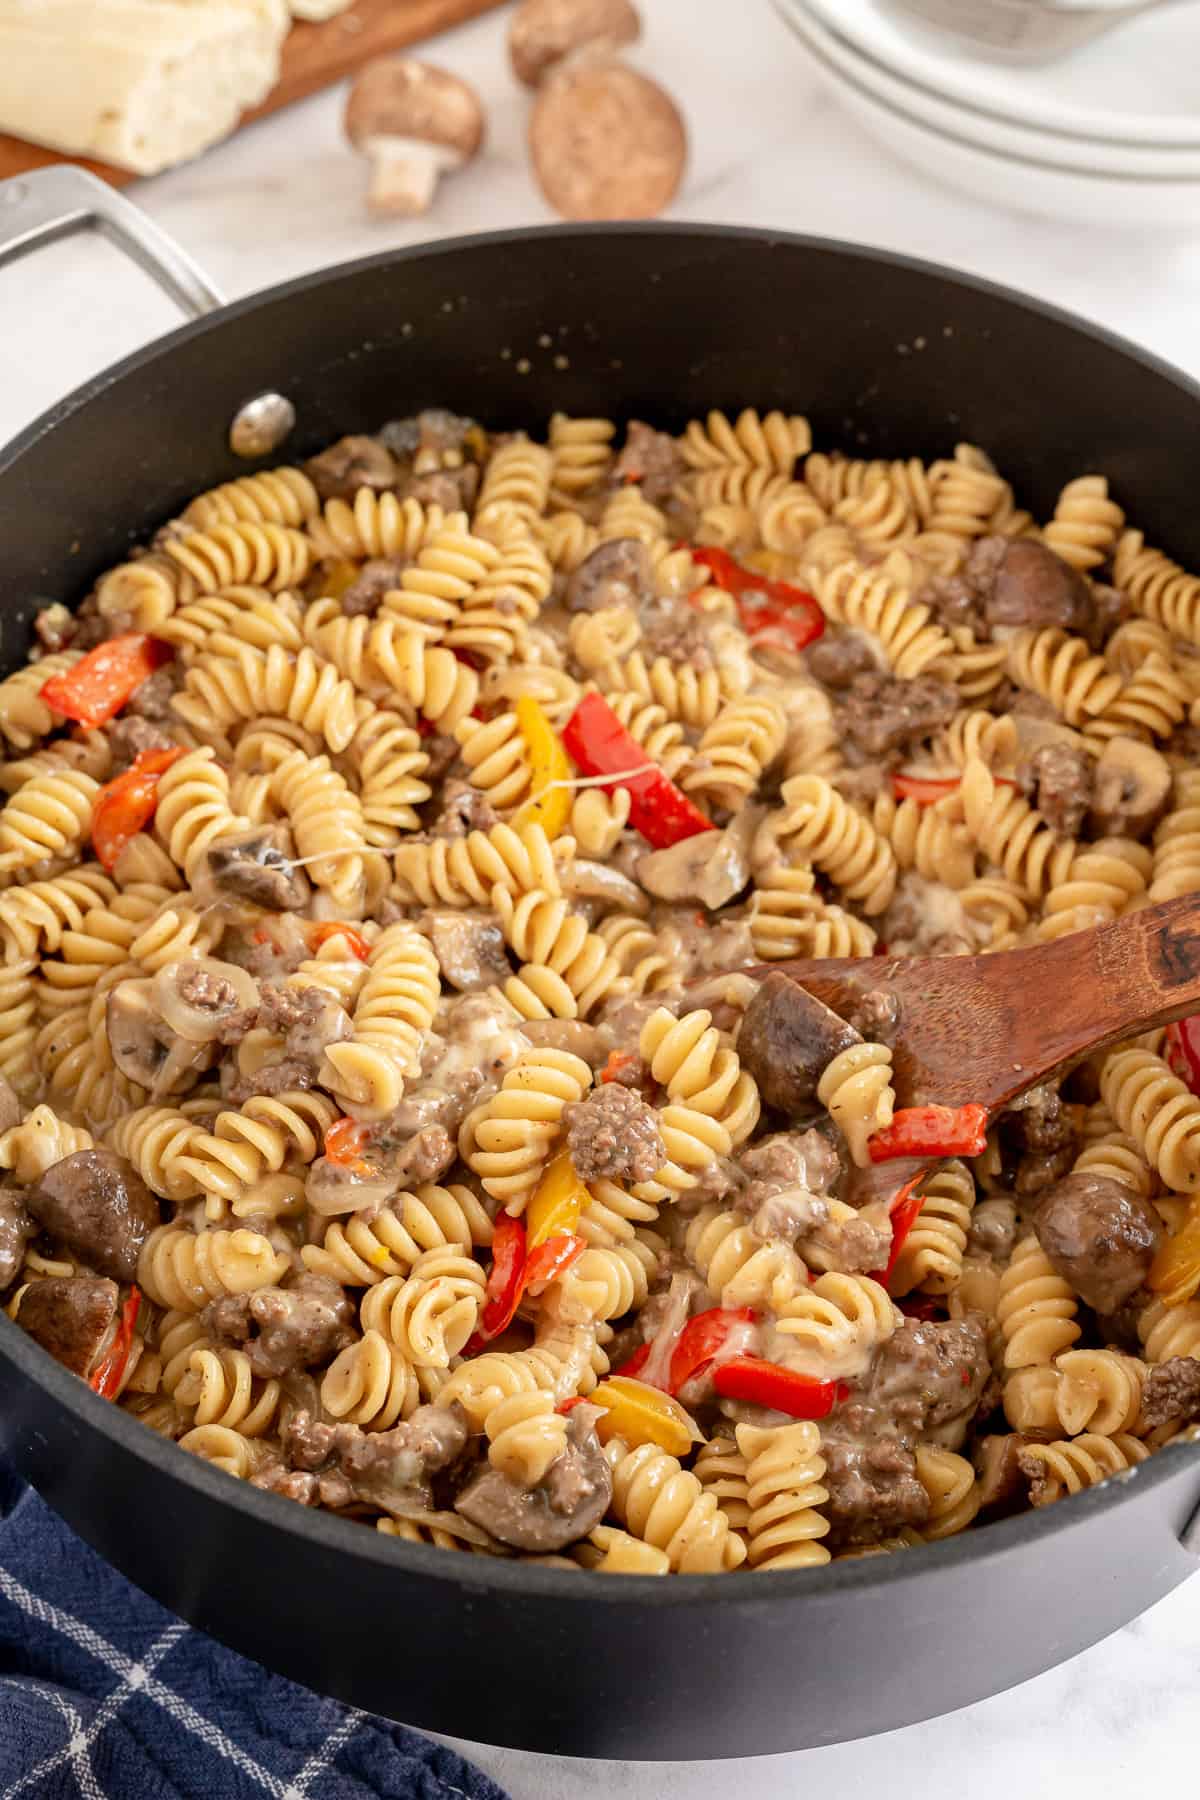 A skillet full of fusilli pasta with ground beef and peppers.